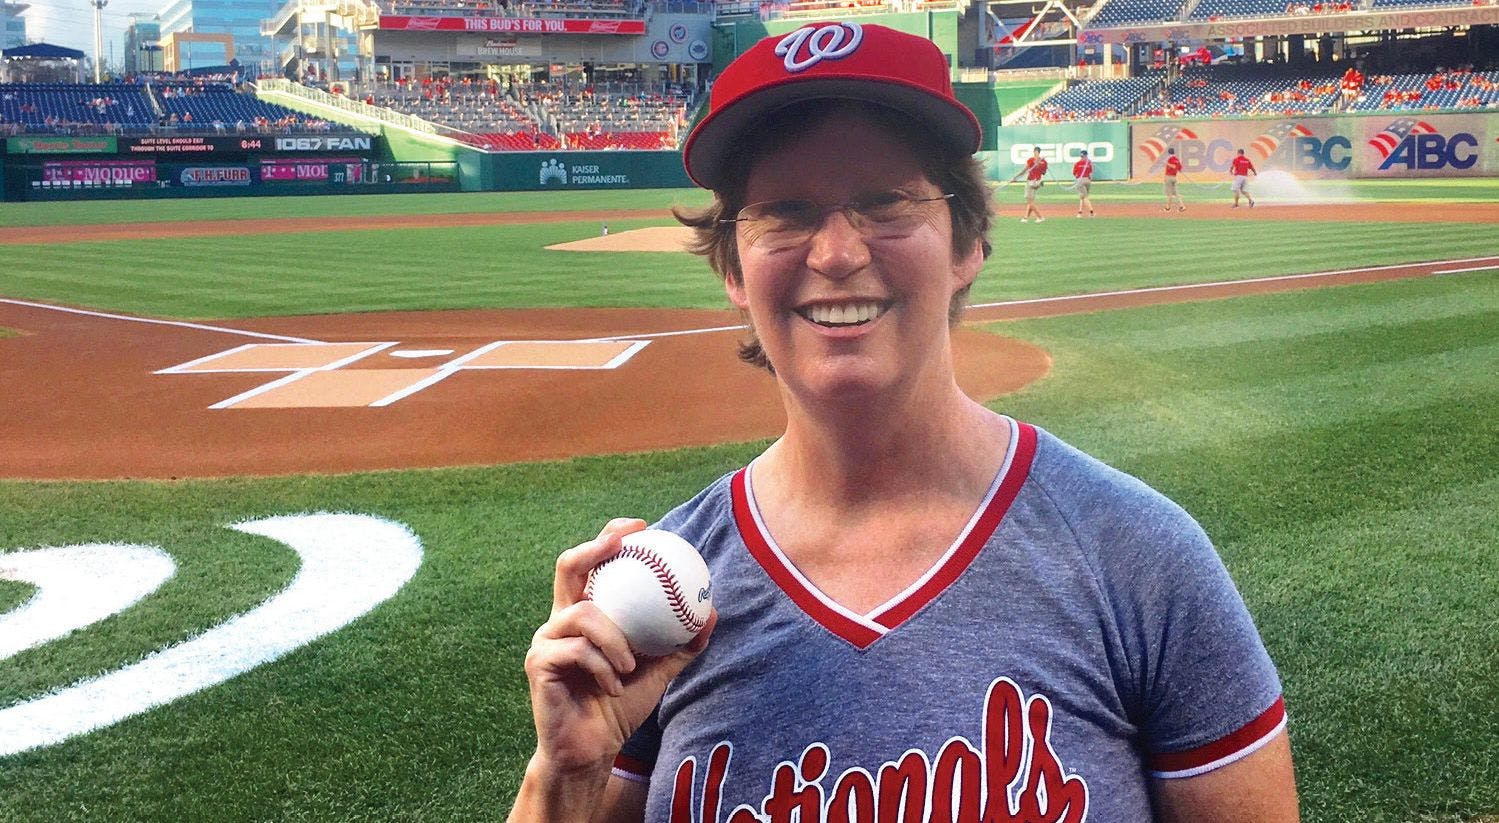 KAREN LOSS threw the
first pitch at the Washington
Nationals game in August to
raise lung cancer awareness. - COURTESY KAREN LOSS / THE WASHINGTON NATIONALS